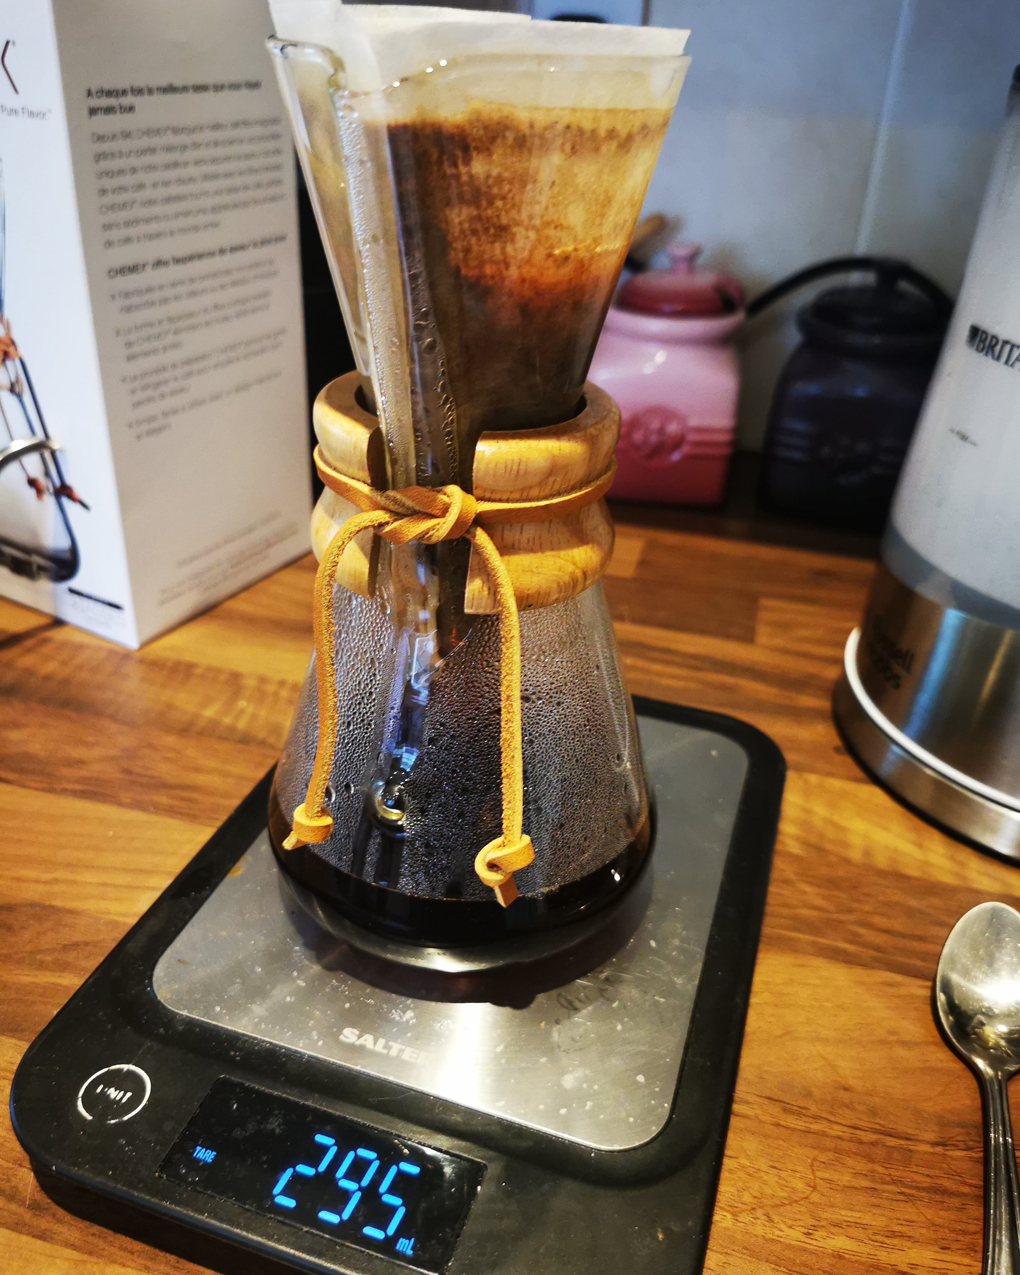 A chemex coffee filter coffee maker sat on a set of scales which reads 295 millilitres